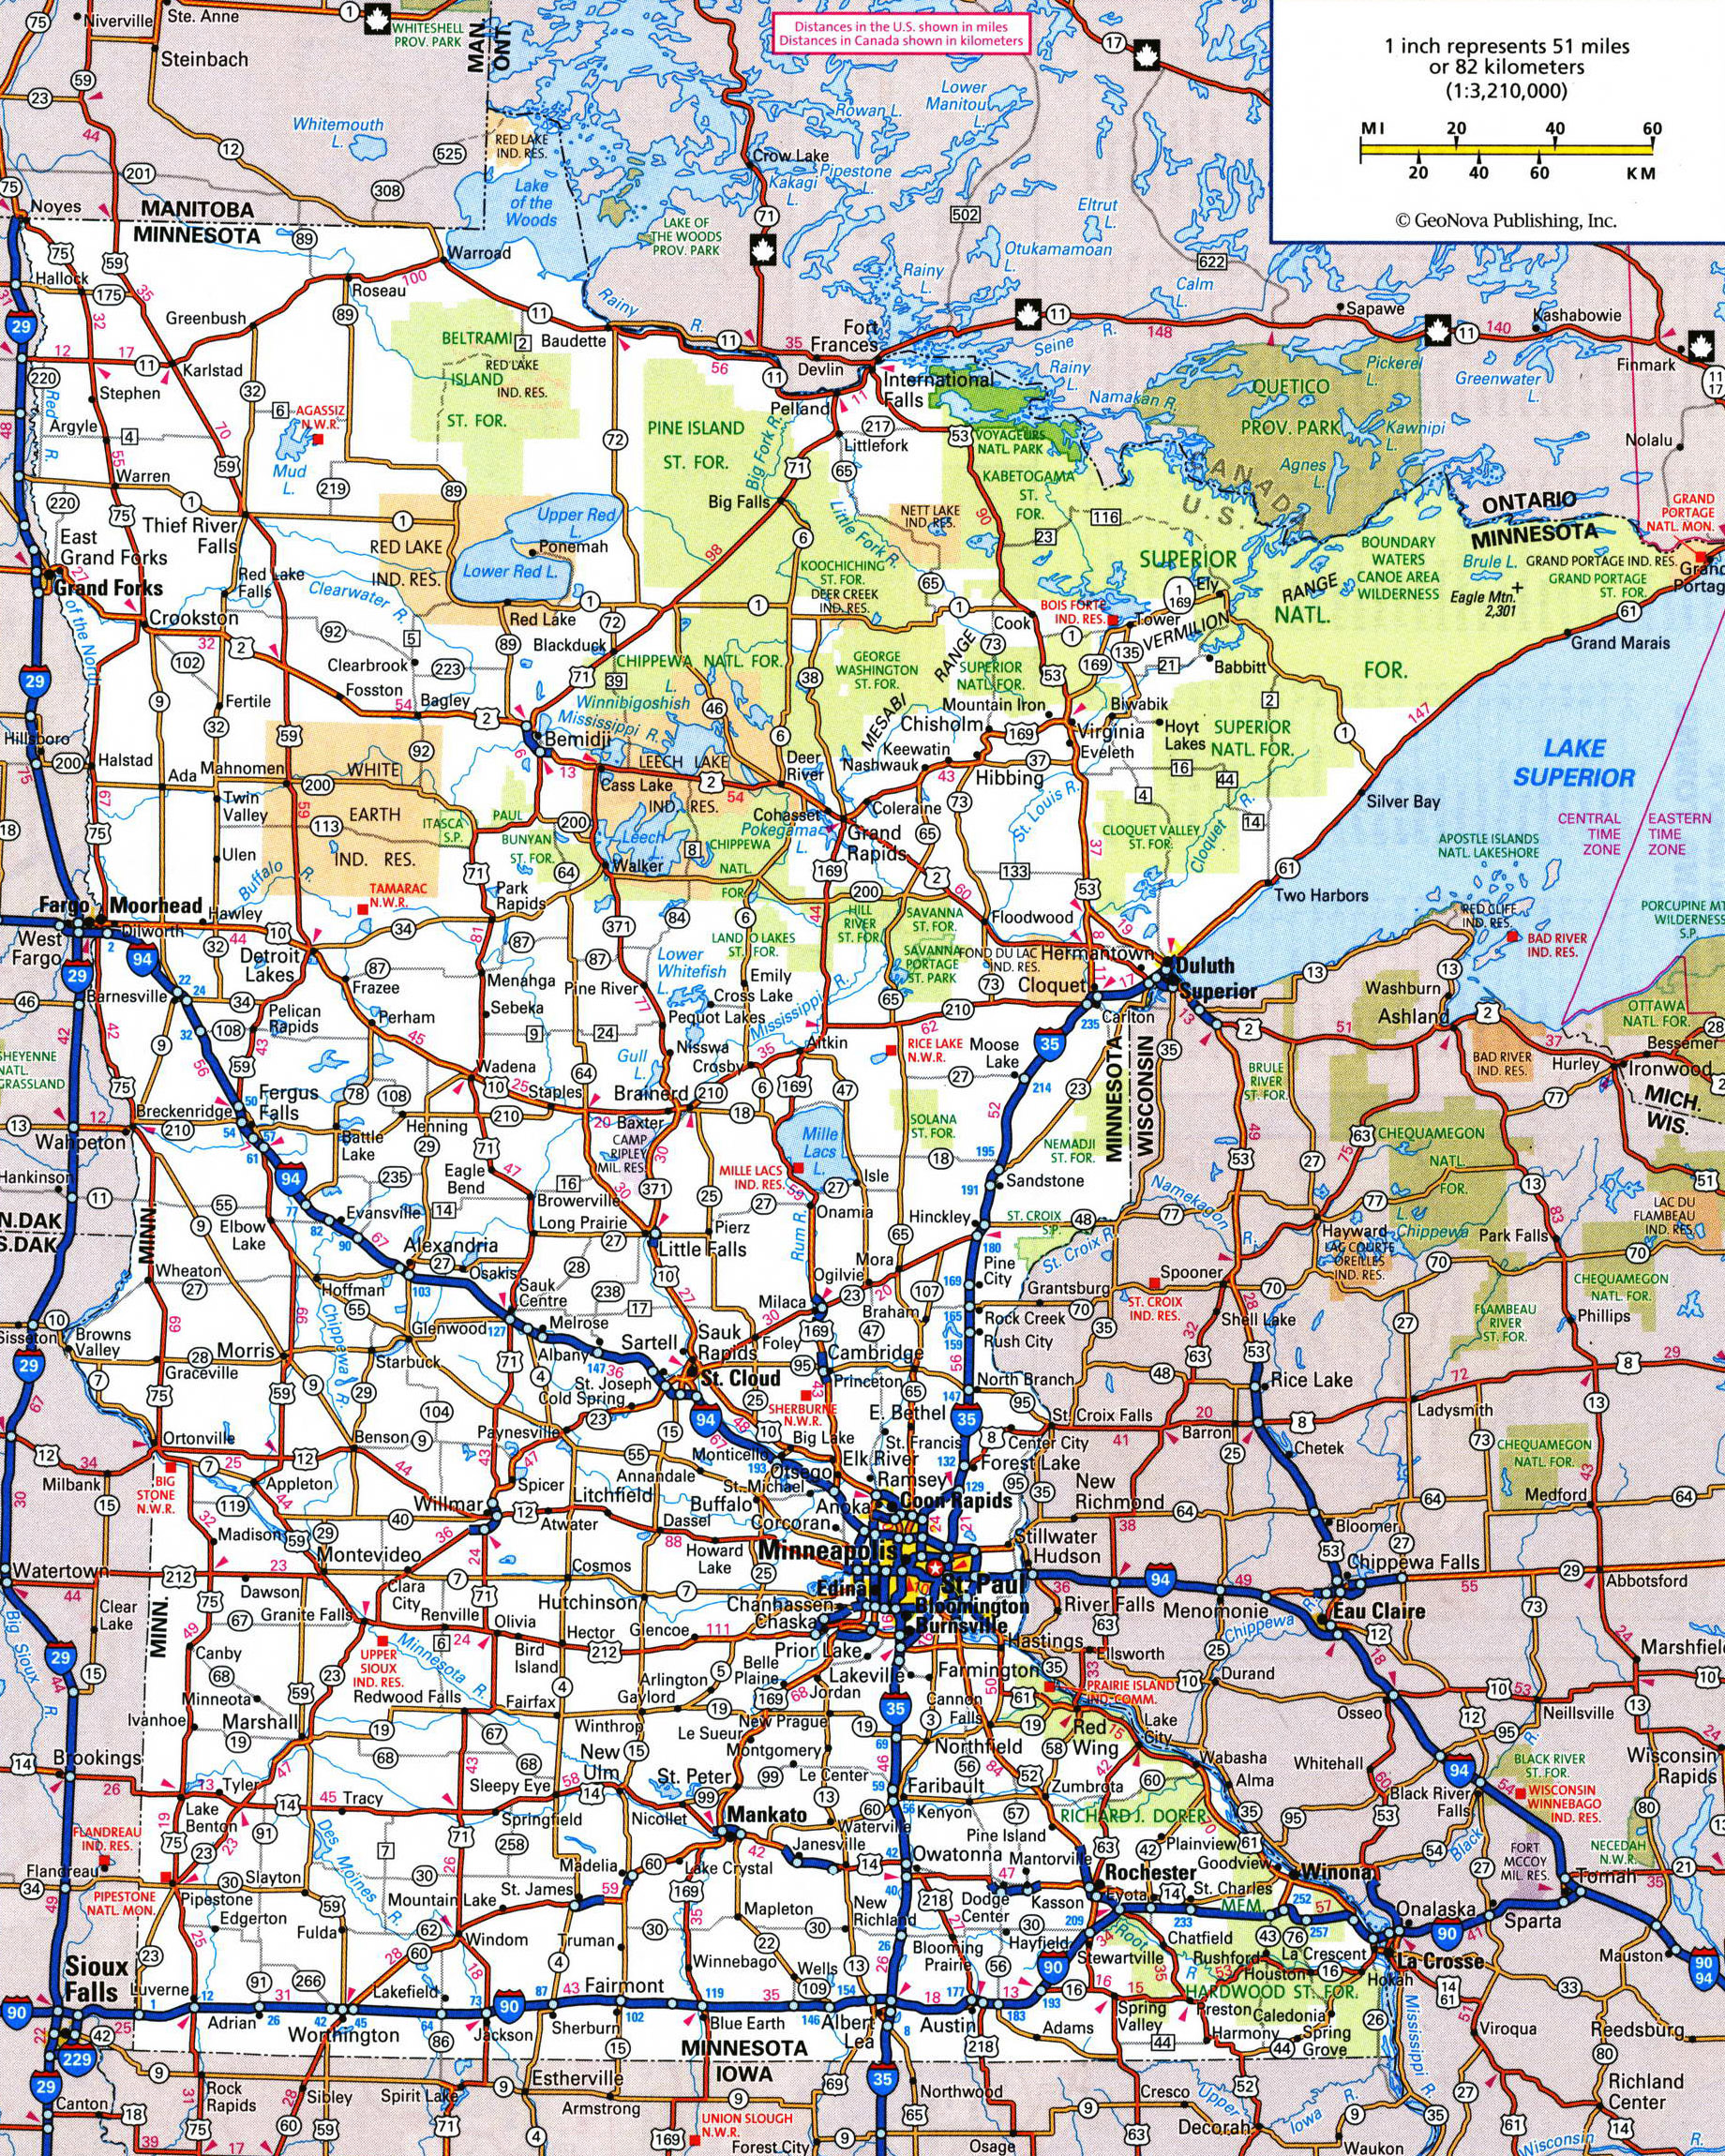 large-detailed-roads-and-highways-map-of-minnesota-state-with-national